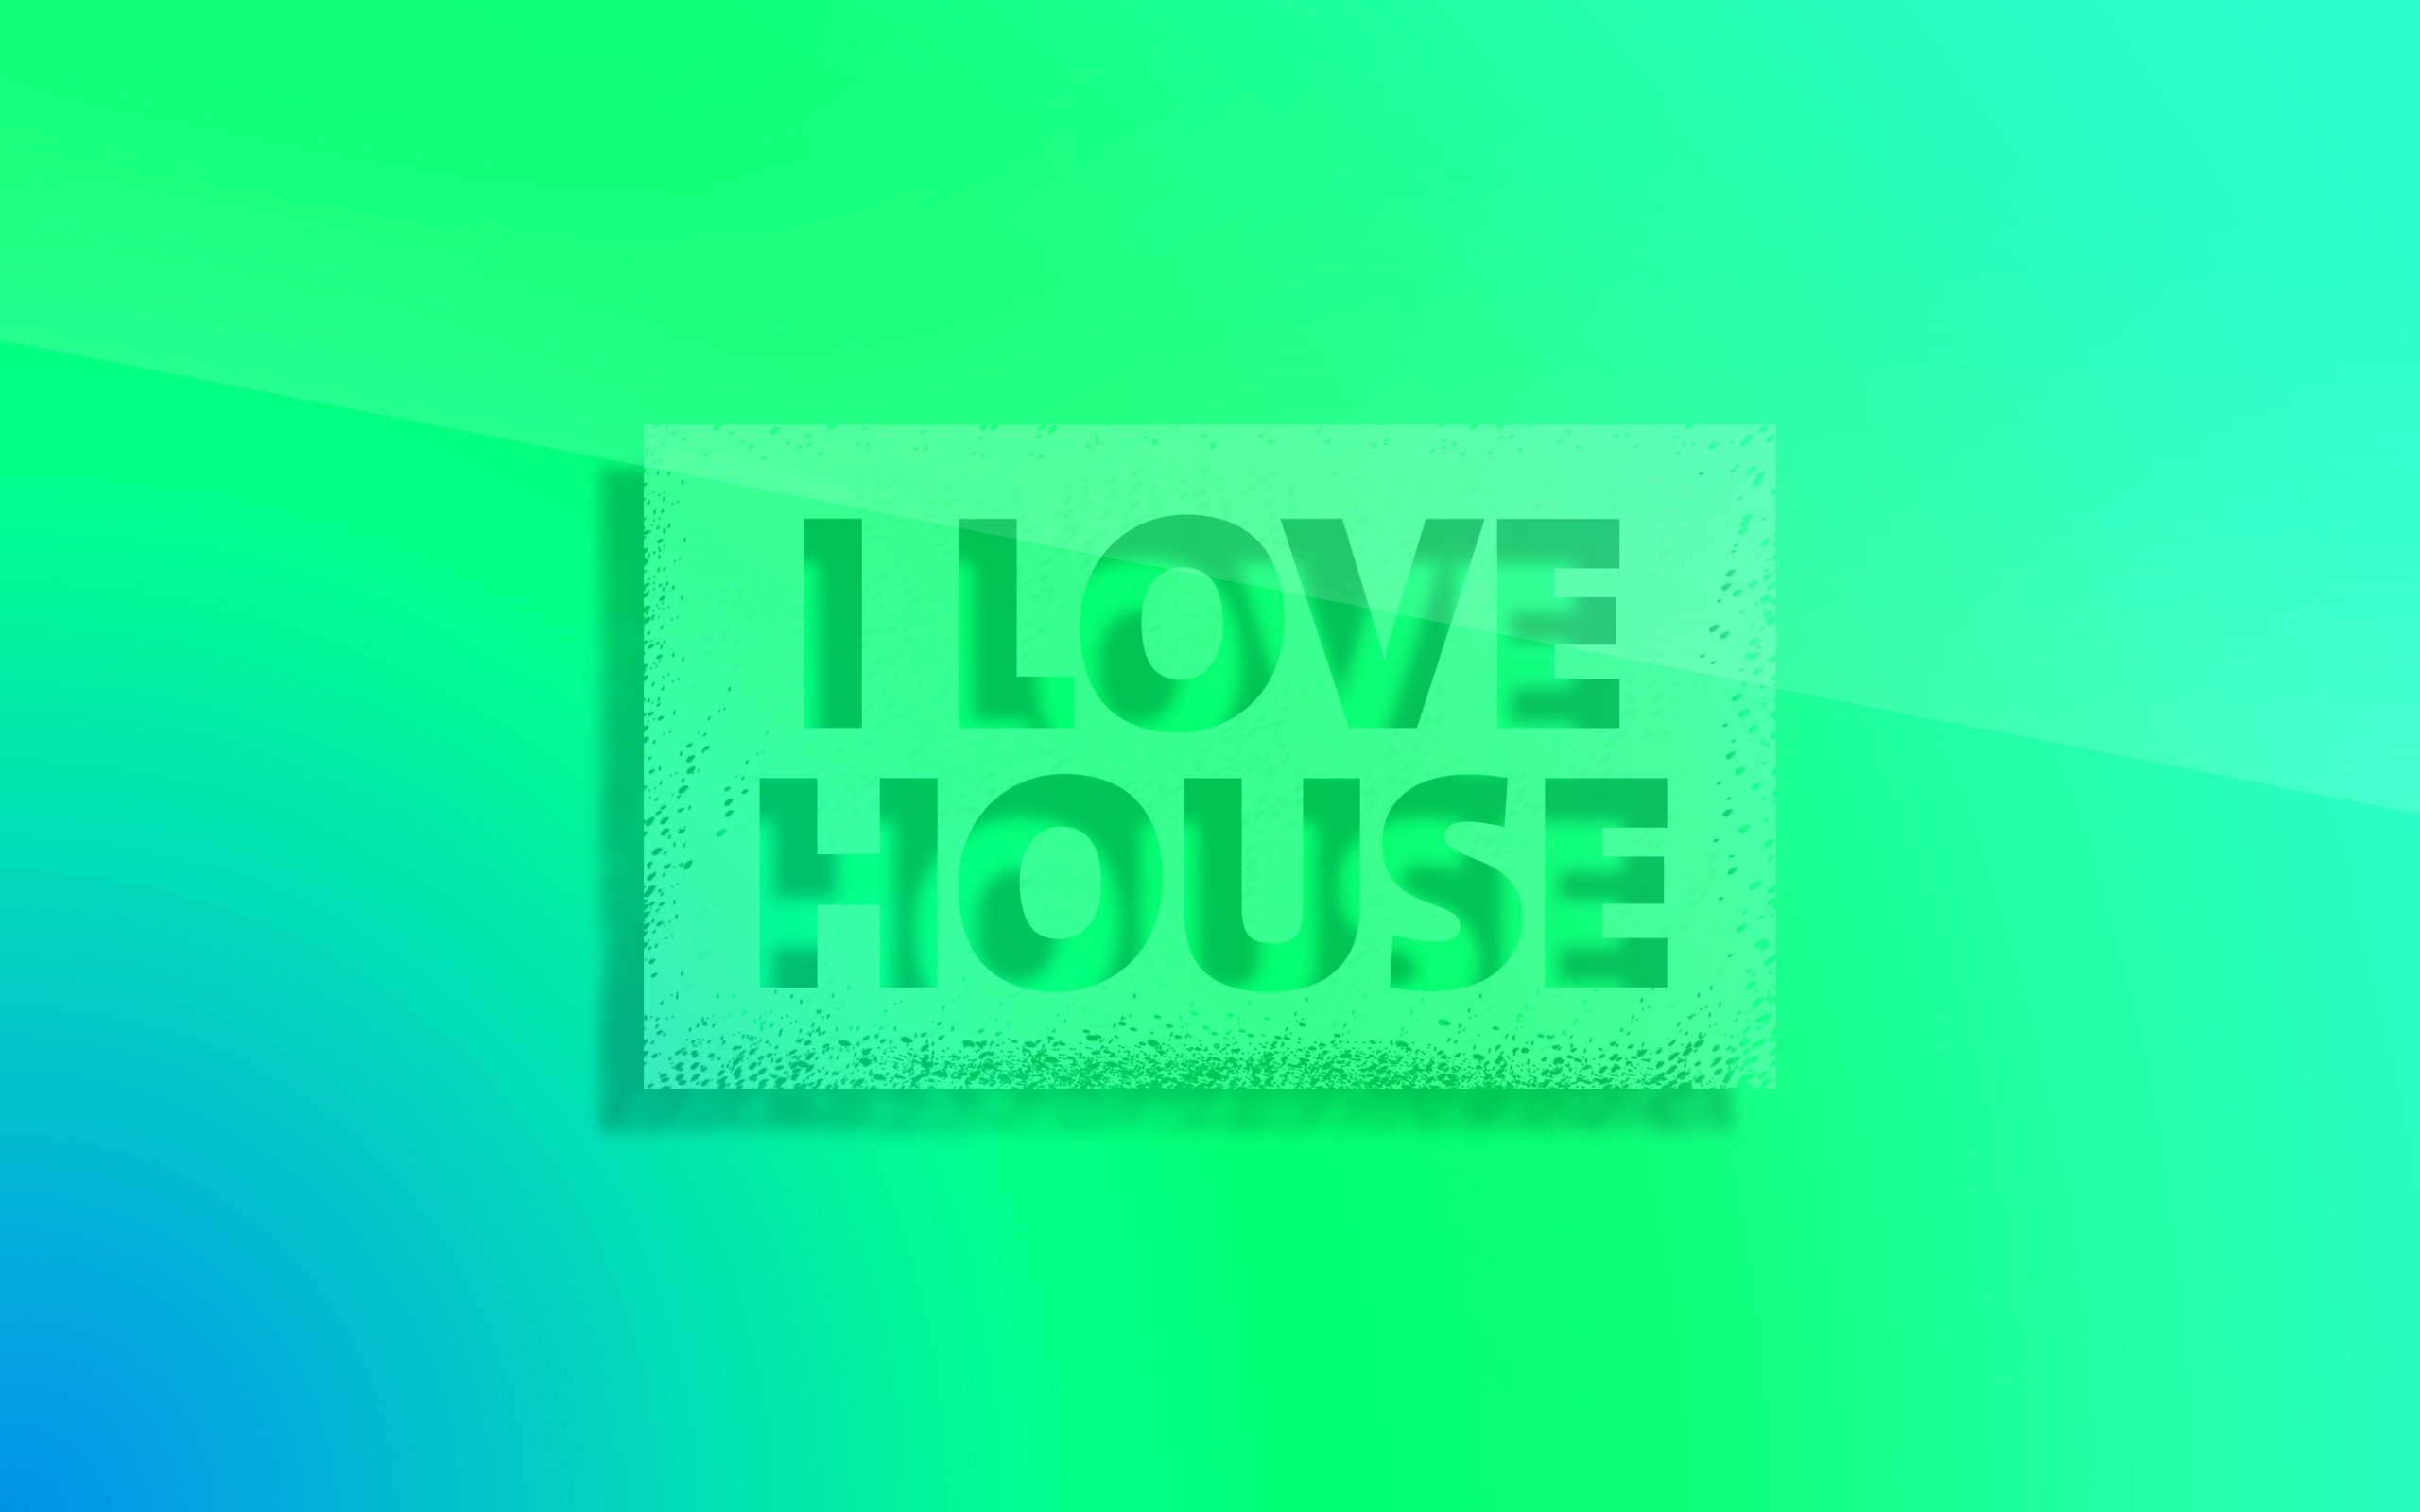 simple, House music Wallpaper